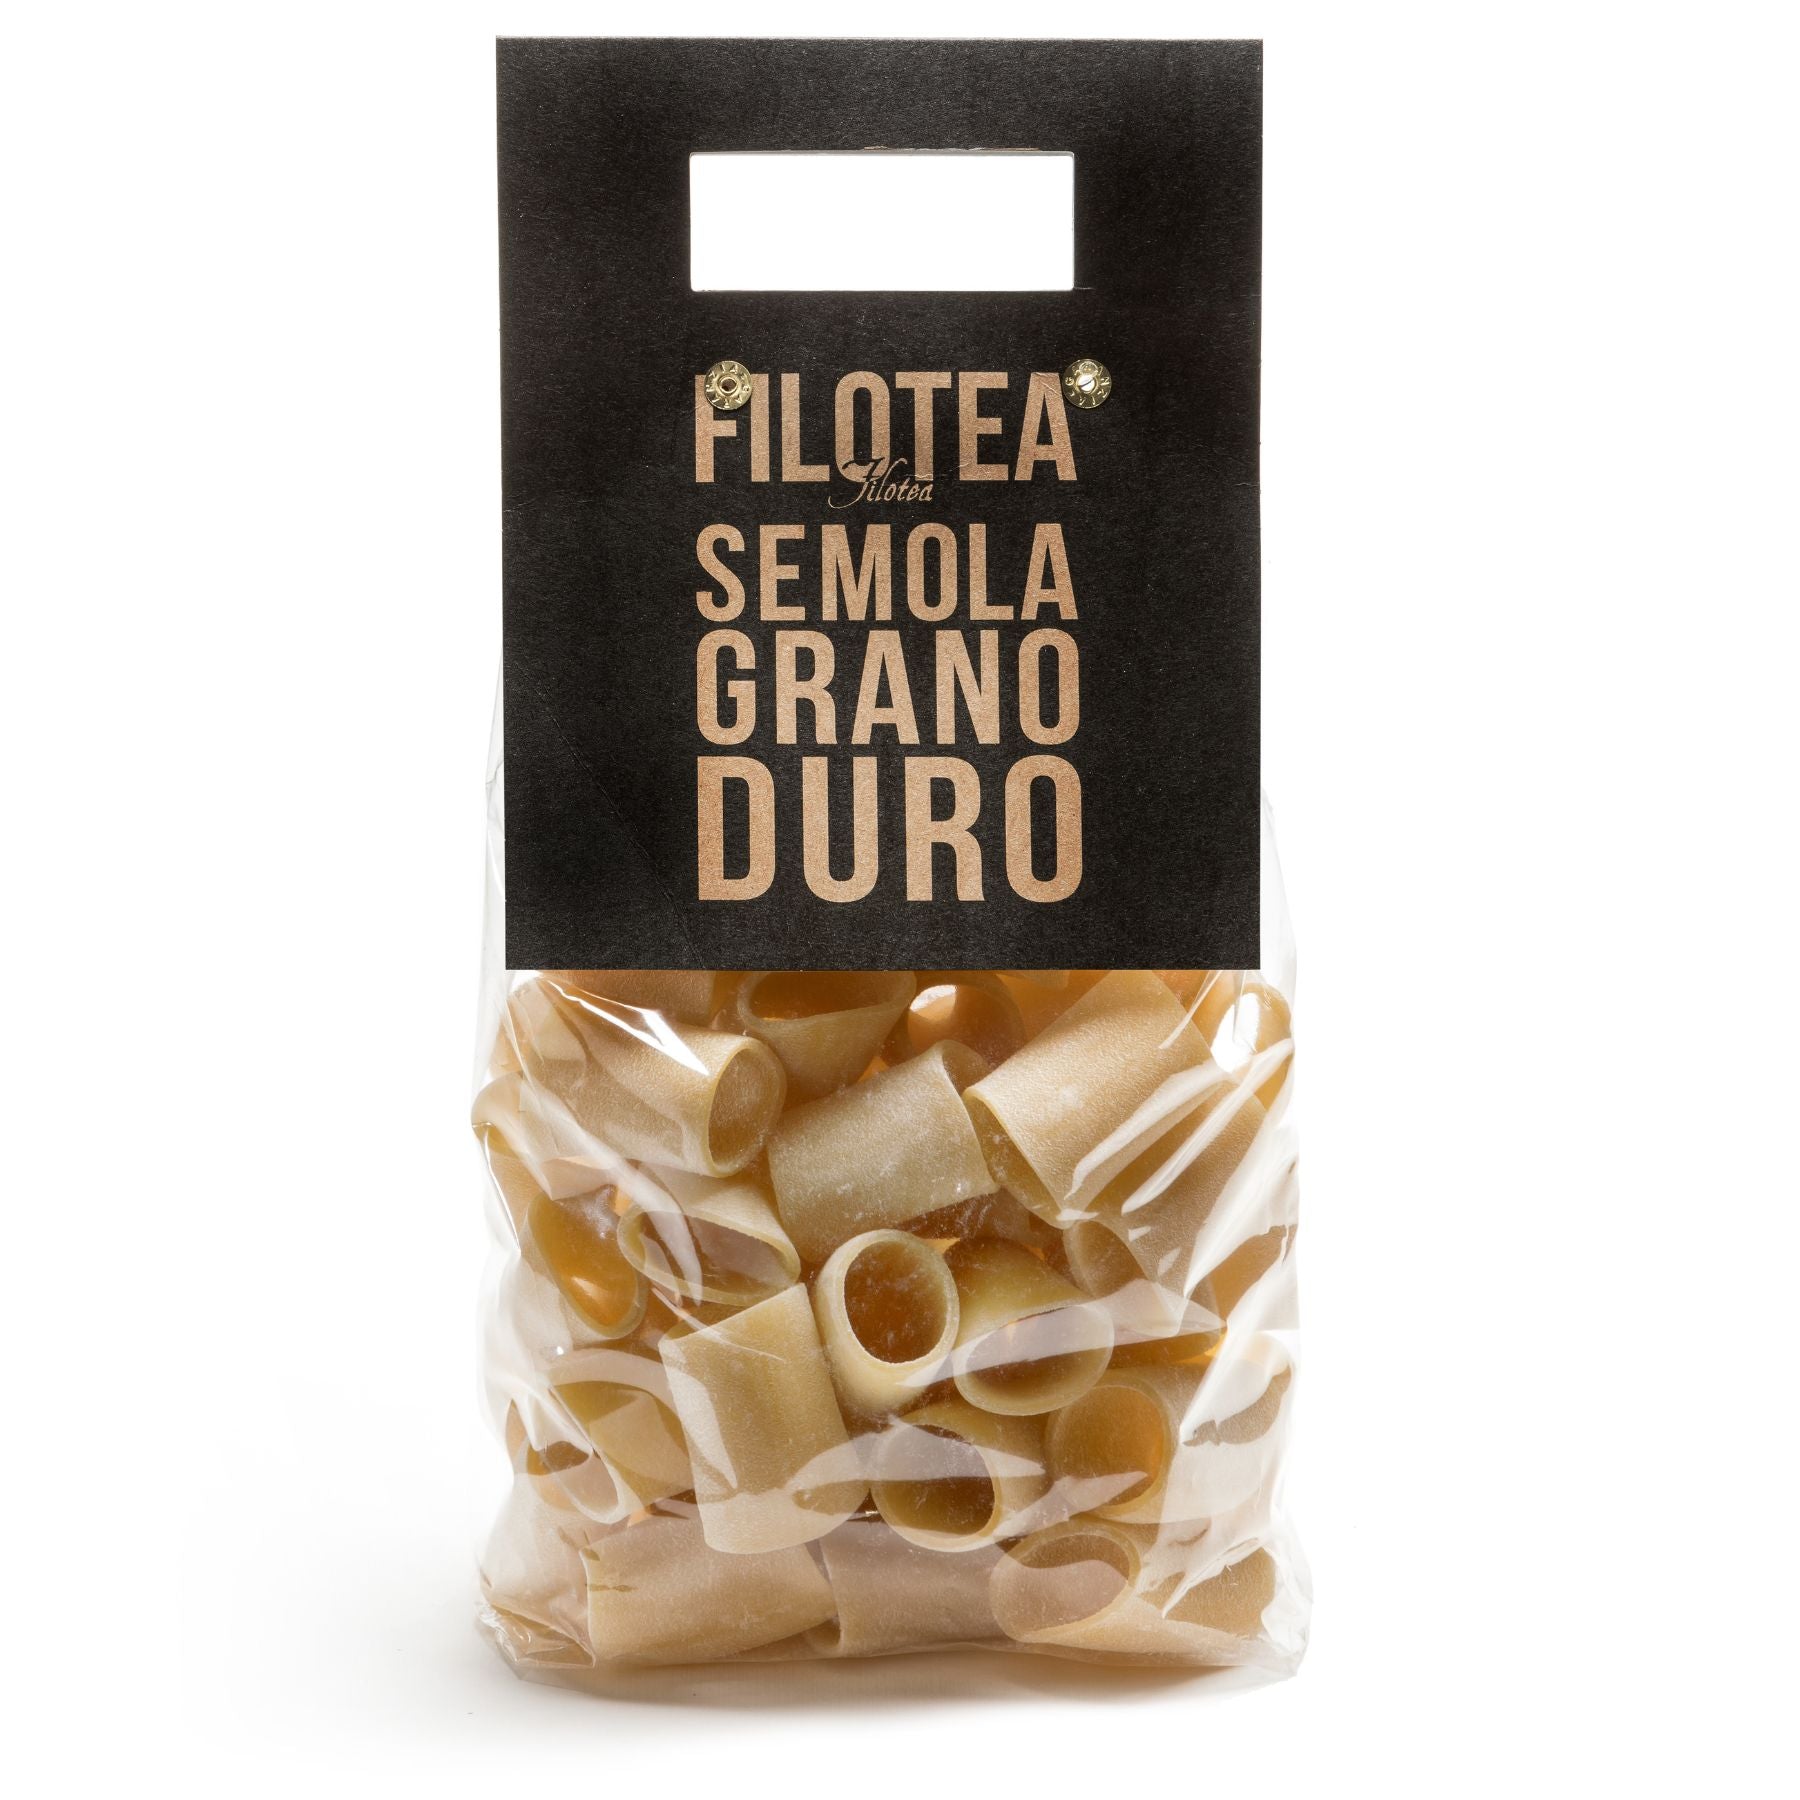 Filotea Paccheri Durum Wheat Semolina Pasta 500g | Imported and distributed in the UK by Just Gourmet Foods